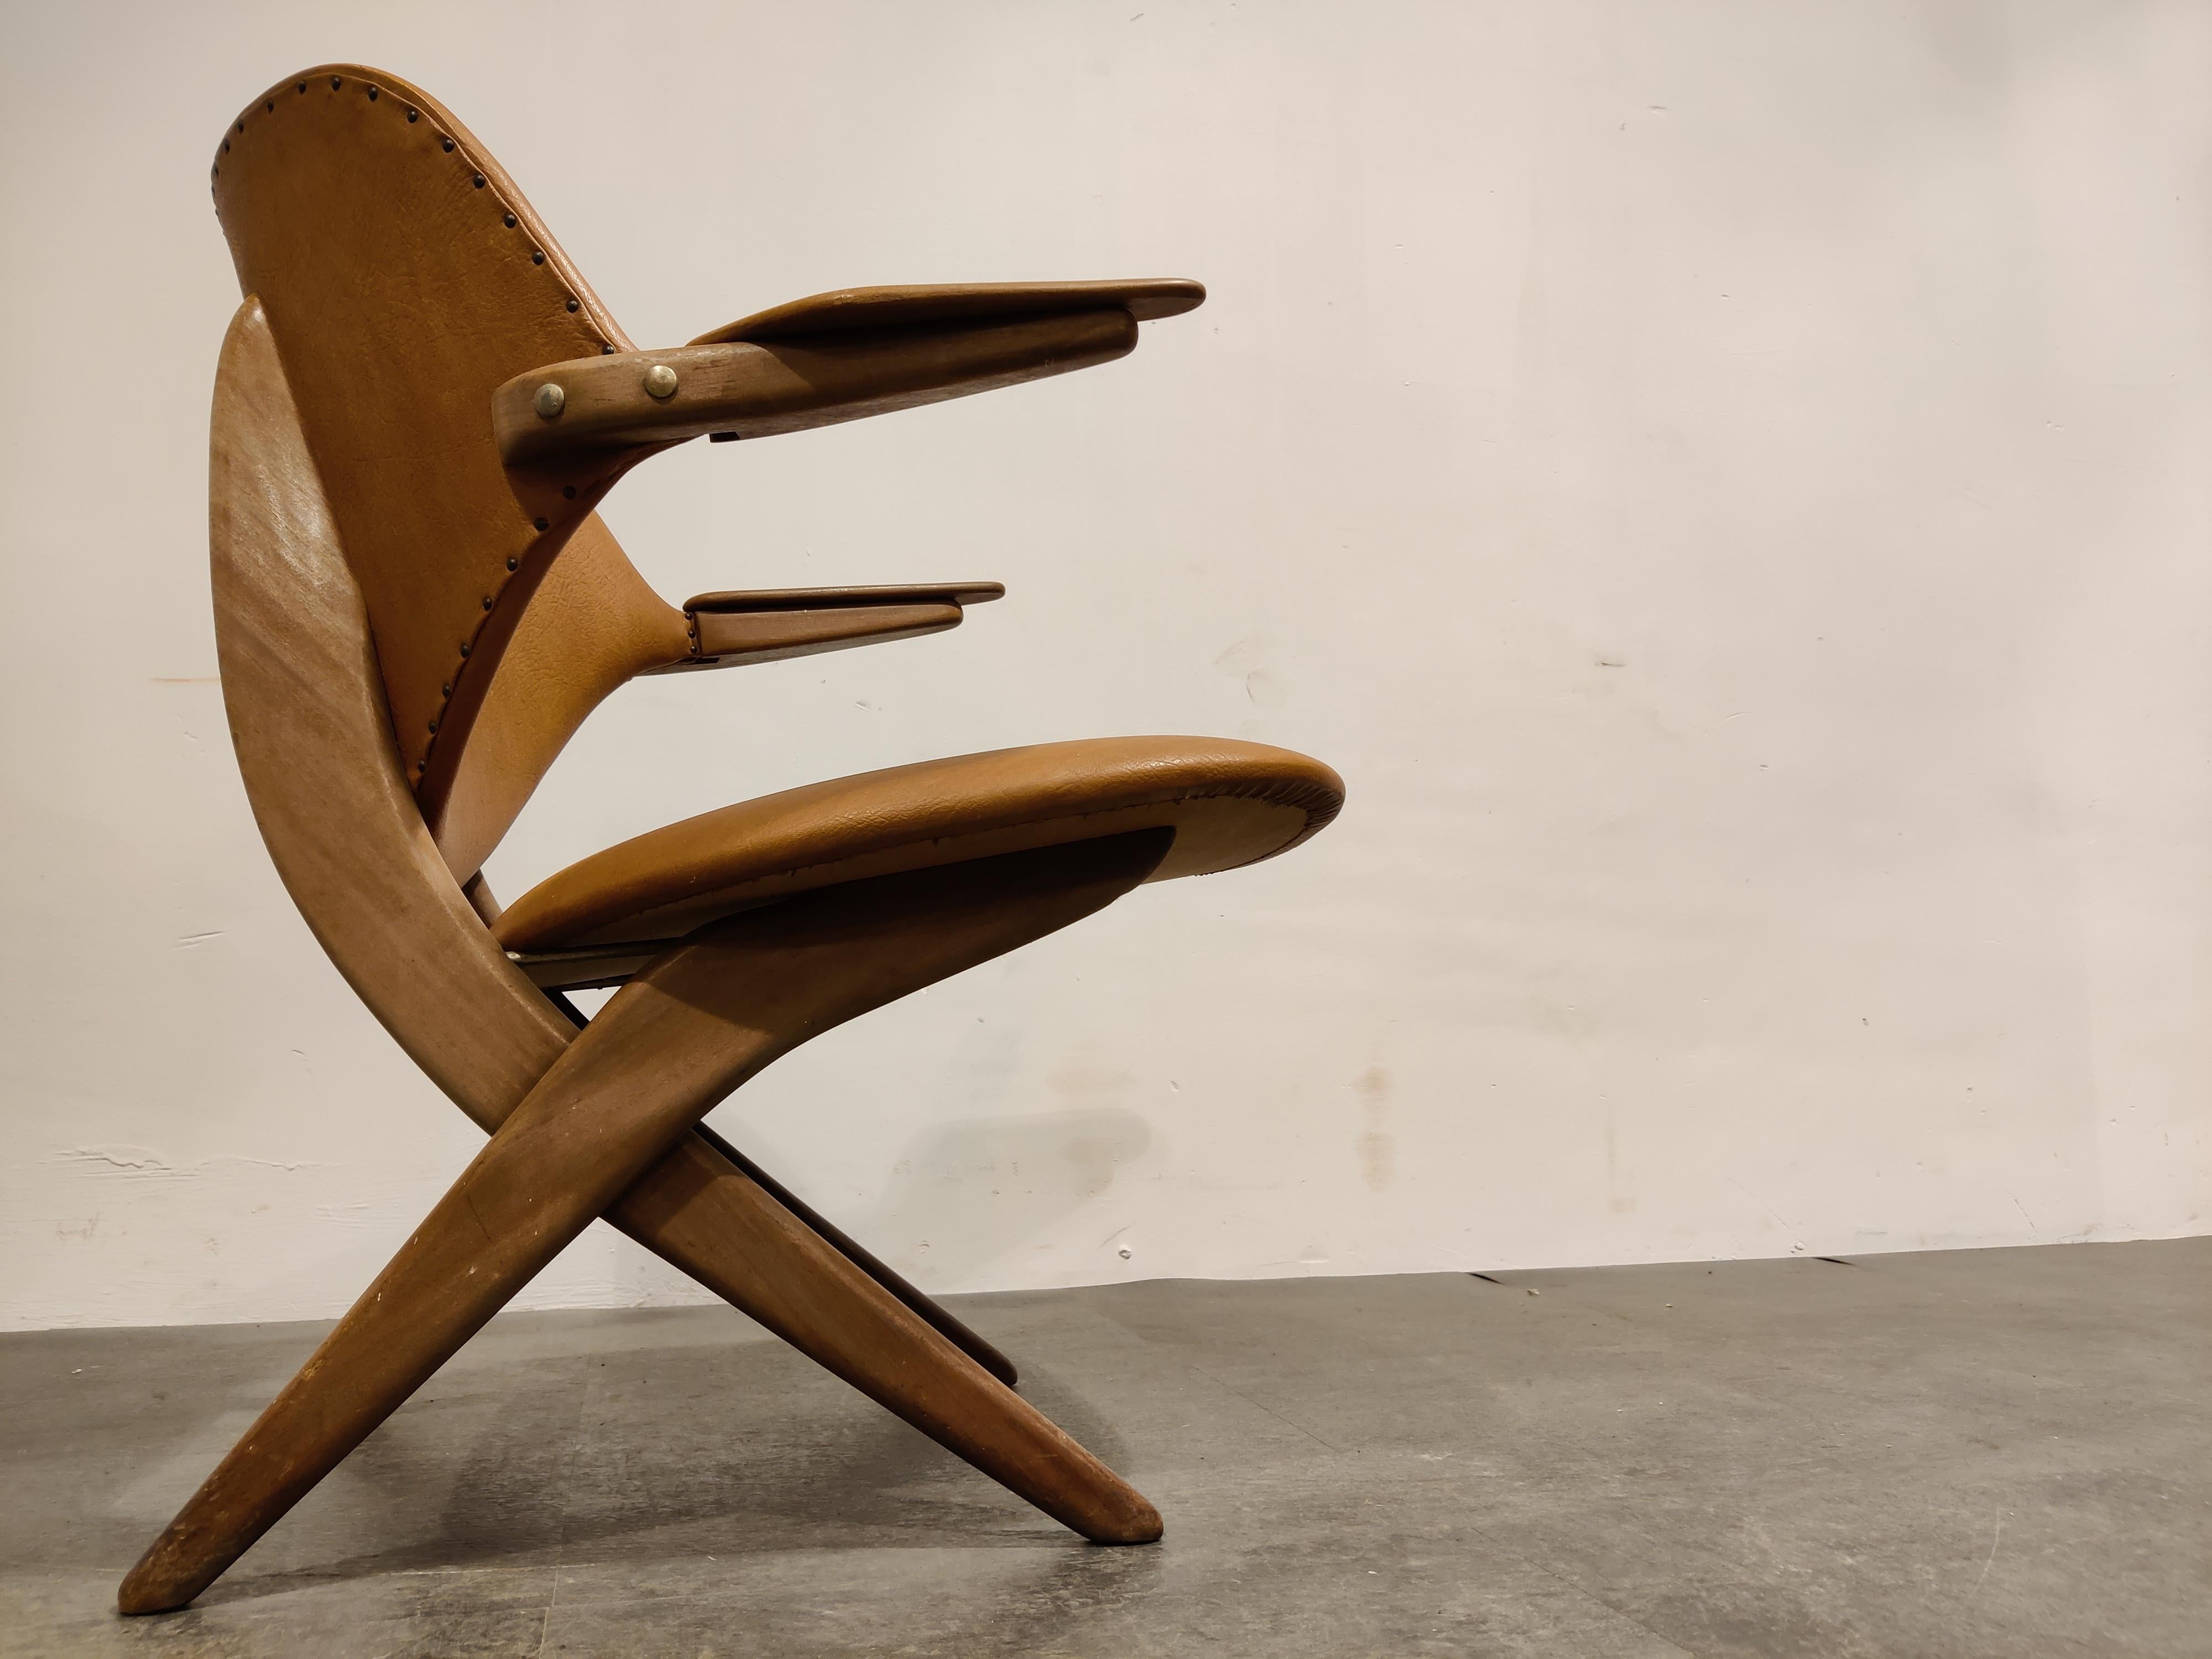 Pair of tan leather and teak armchairs model 'Pelican' designed by Mid century designer Louis Van Teeffelen for Wébé meubelen.

Van Teeffelen is one of our personal favorites because of his beautiful organic designs which translate into elegant